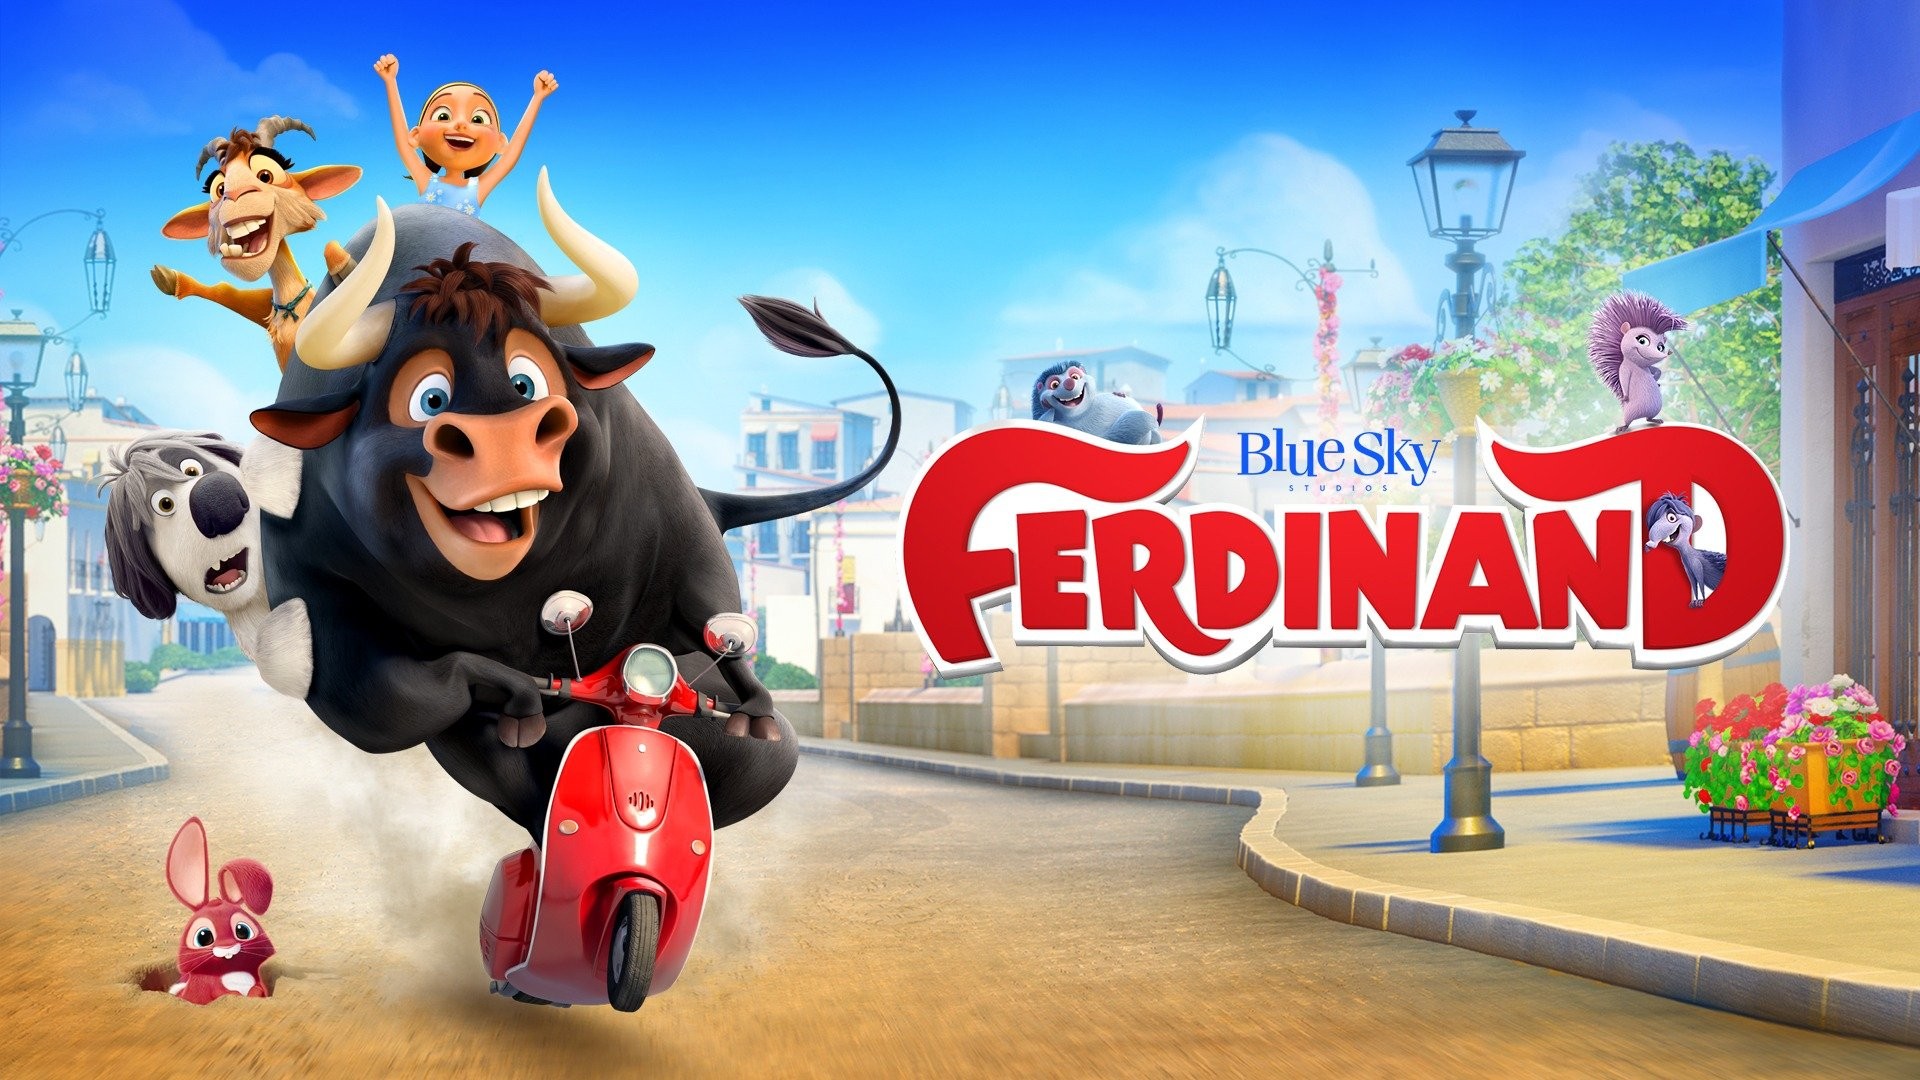 Ferdinand review: A sweet and amusing animation, Films, Entertainment